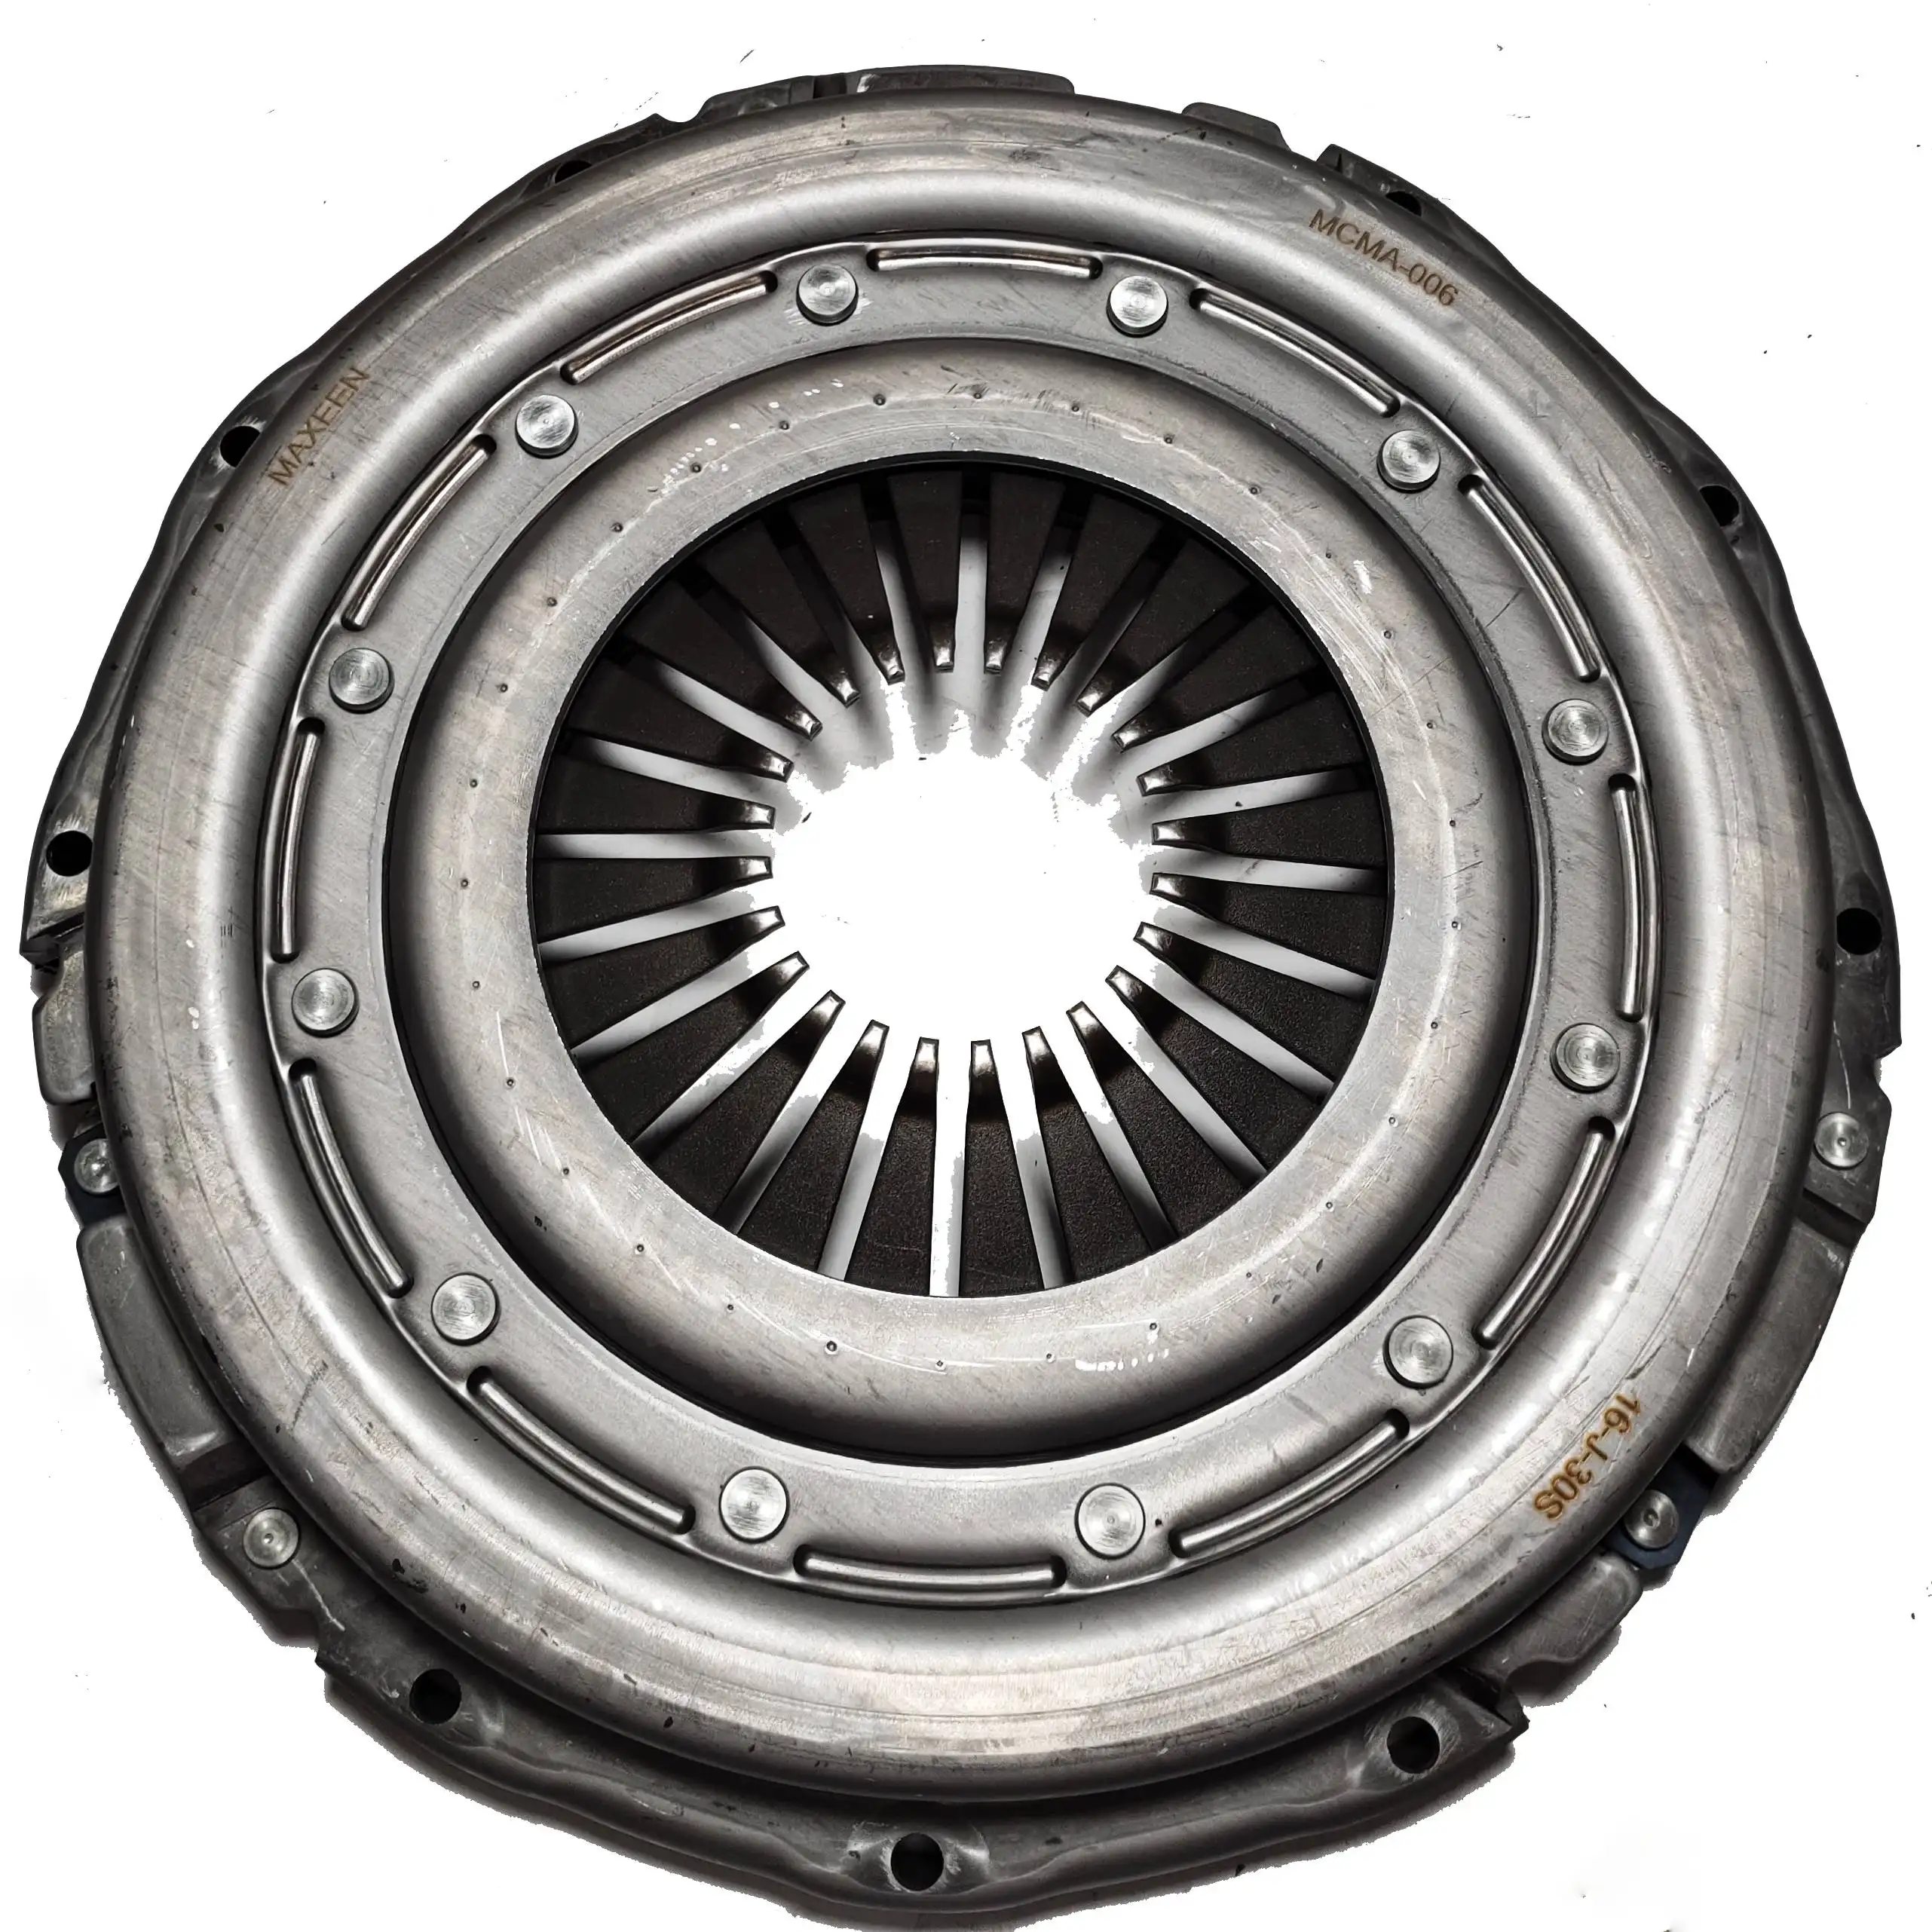 Clutch cover assembly 3482 125 533 size 362mm suitable for MAN, AVIA with Maxeen No. MCMA-006